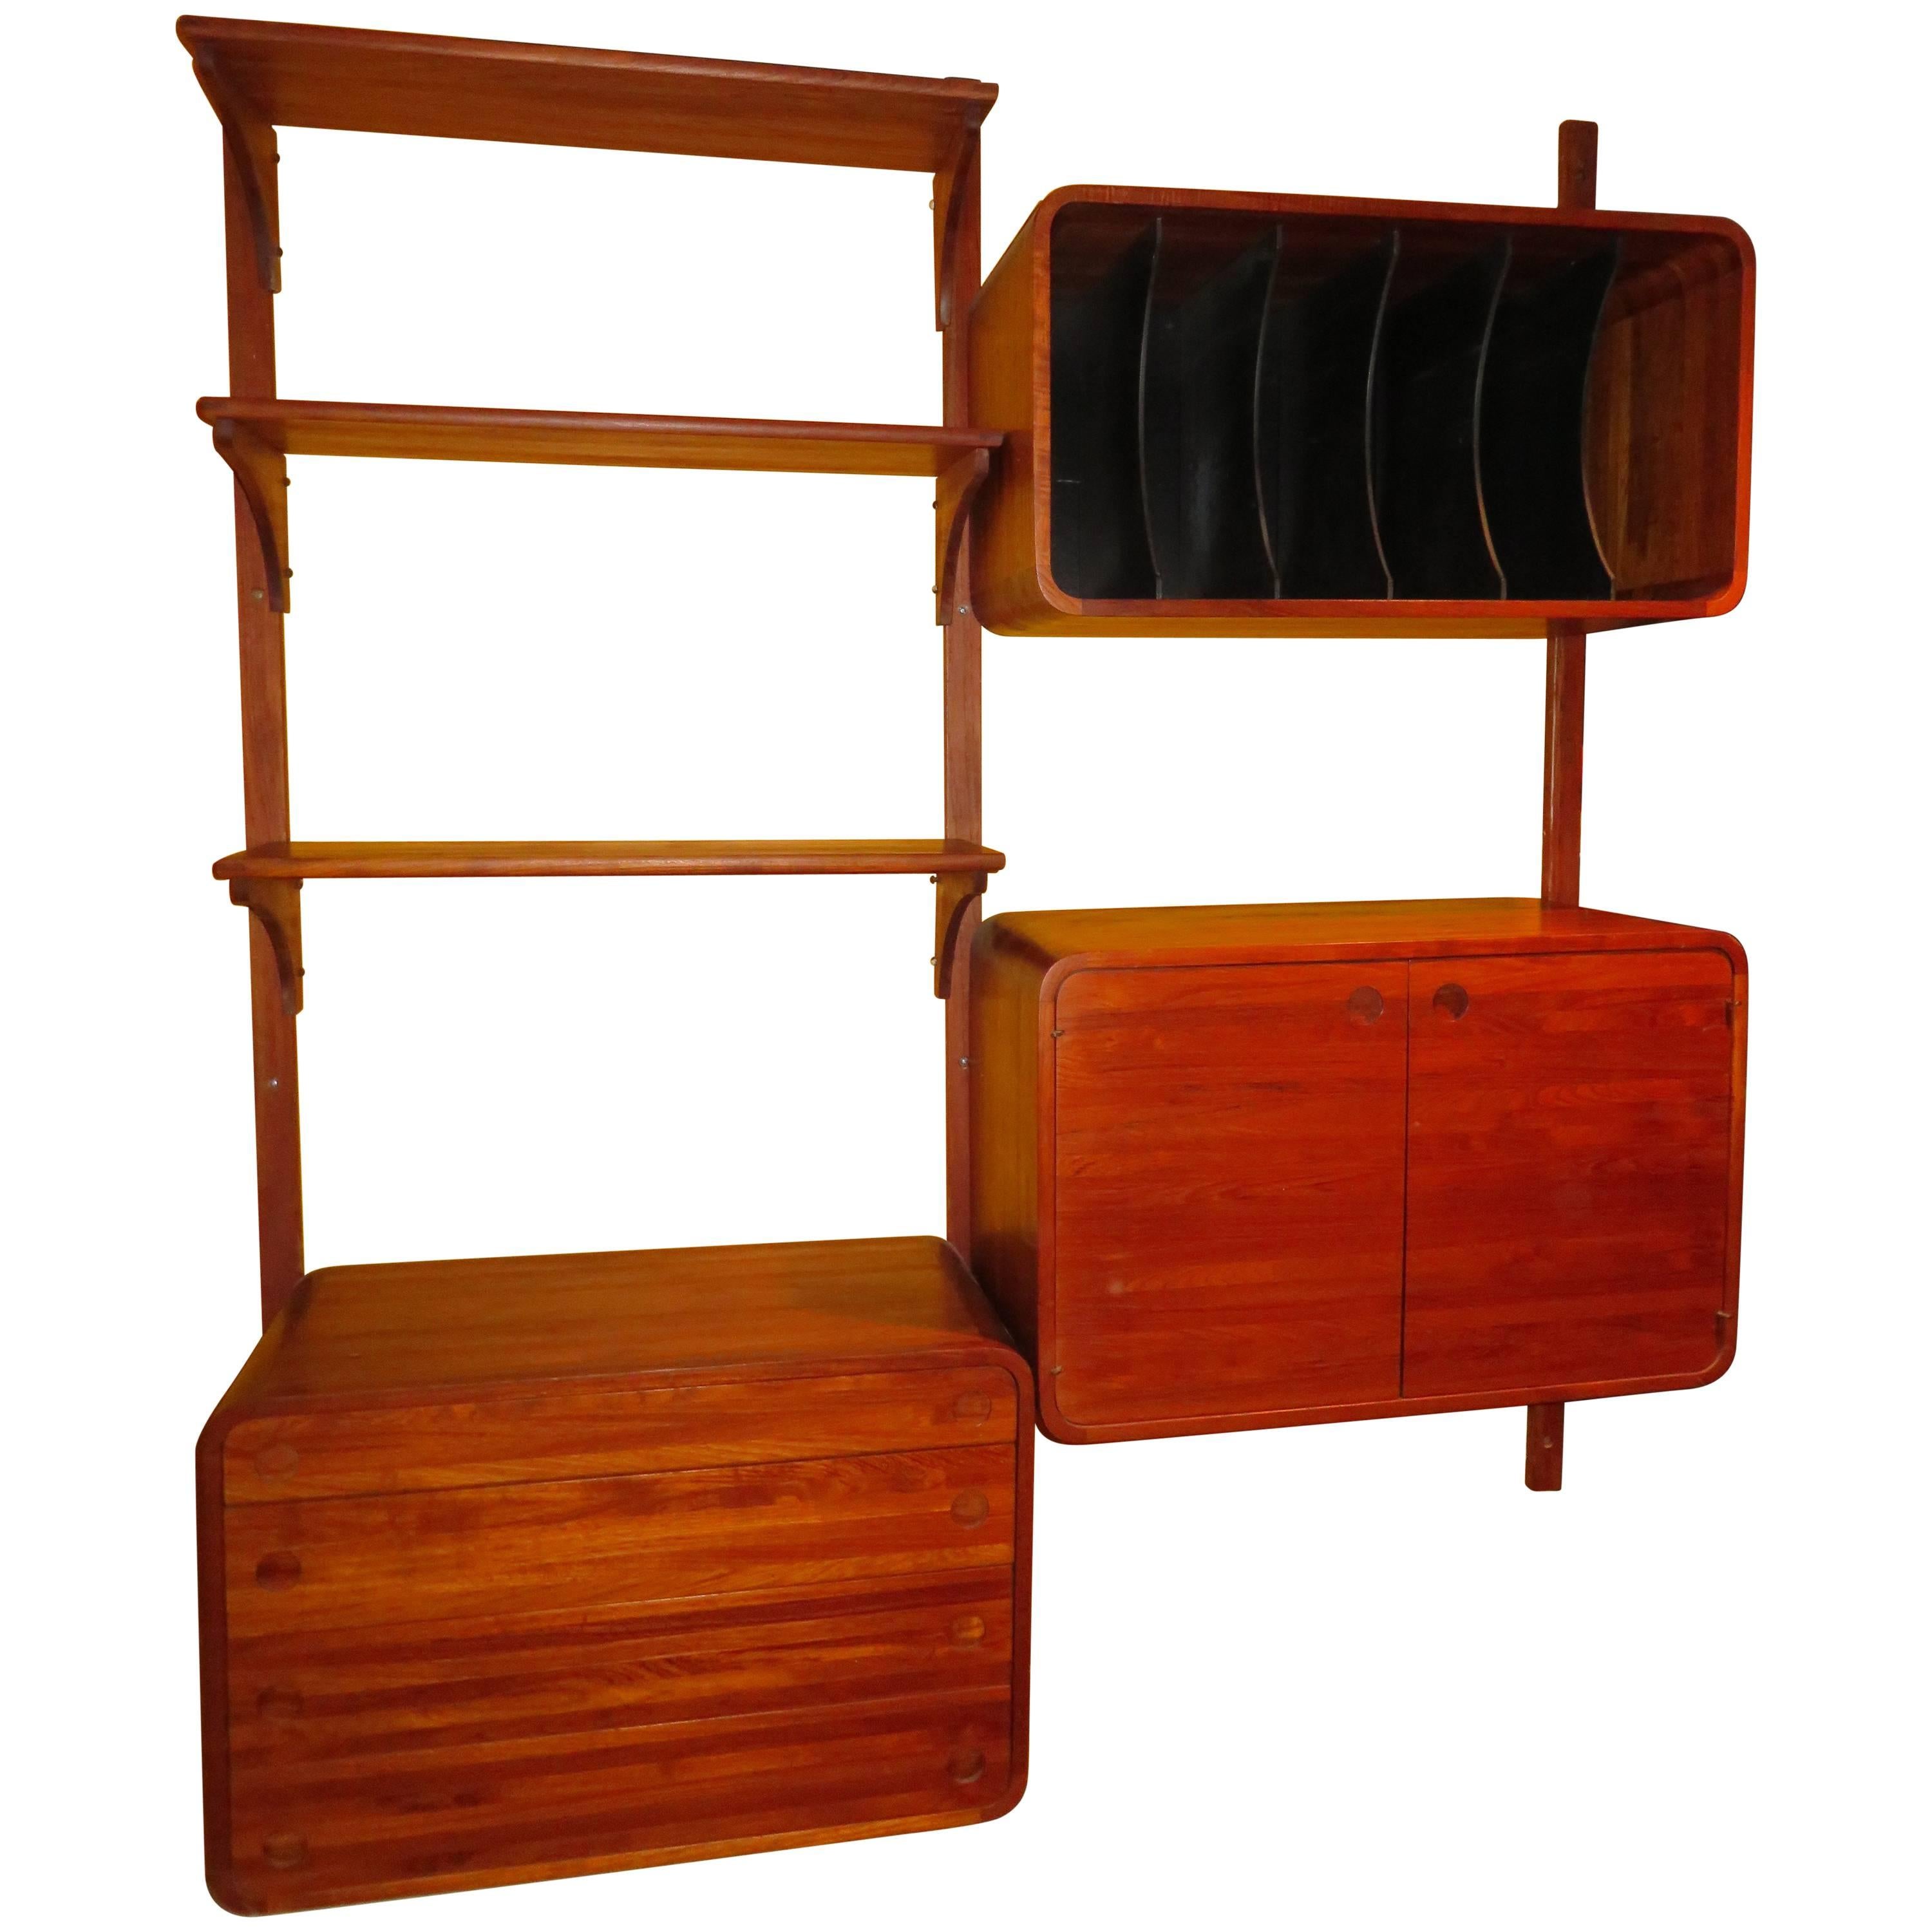 Unusual Two Bay Solid Teak Stereo Wall Unit Woodcraft Mid-Century Modern For Sale